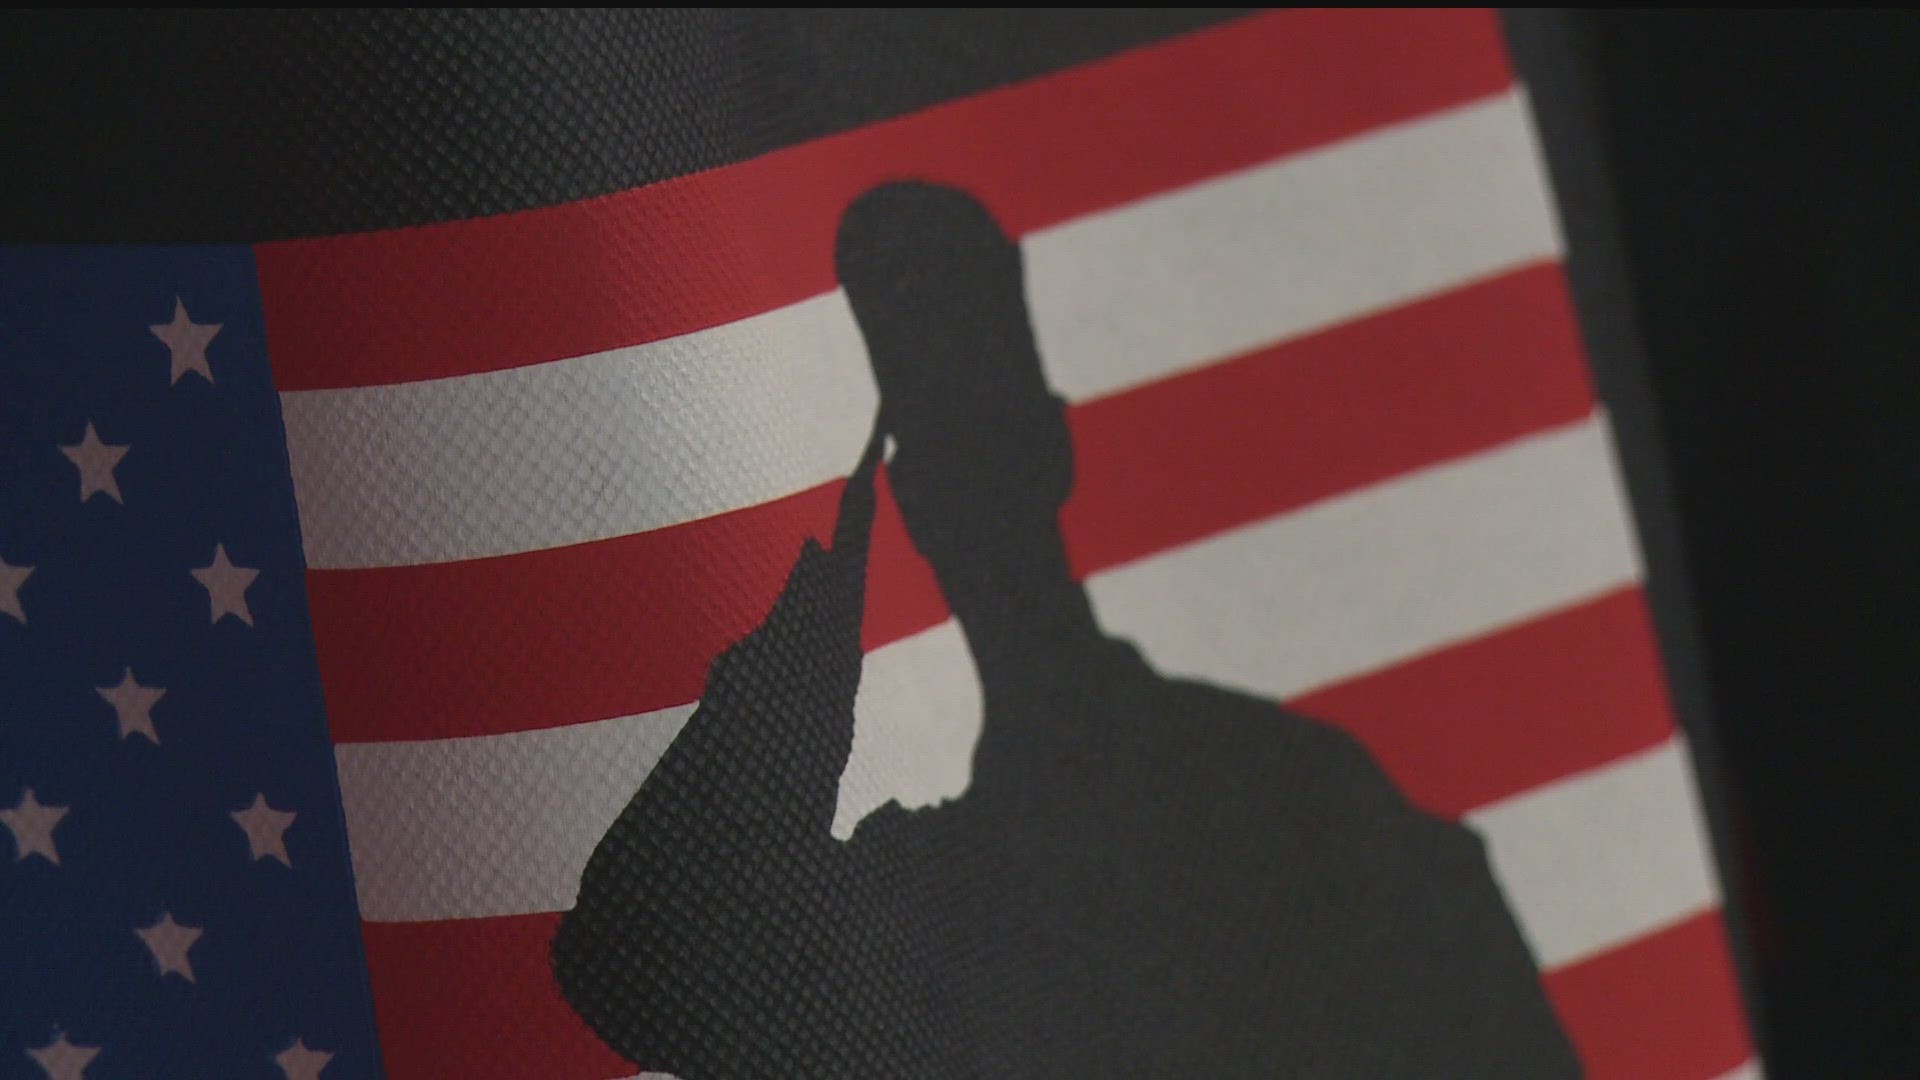 Some veterans took the opportunity to talk about the challenges they faced, including PTSD.